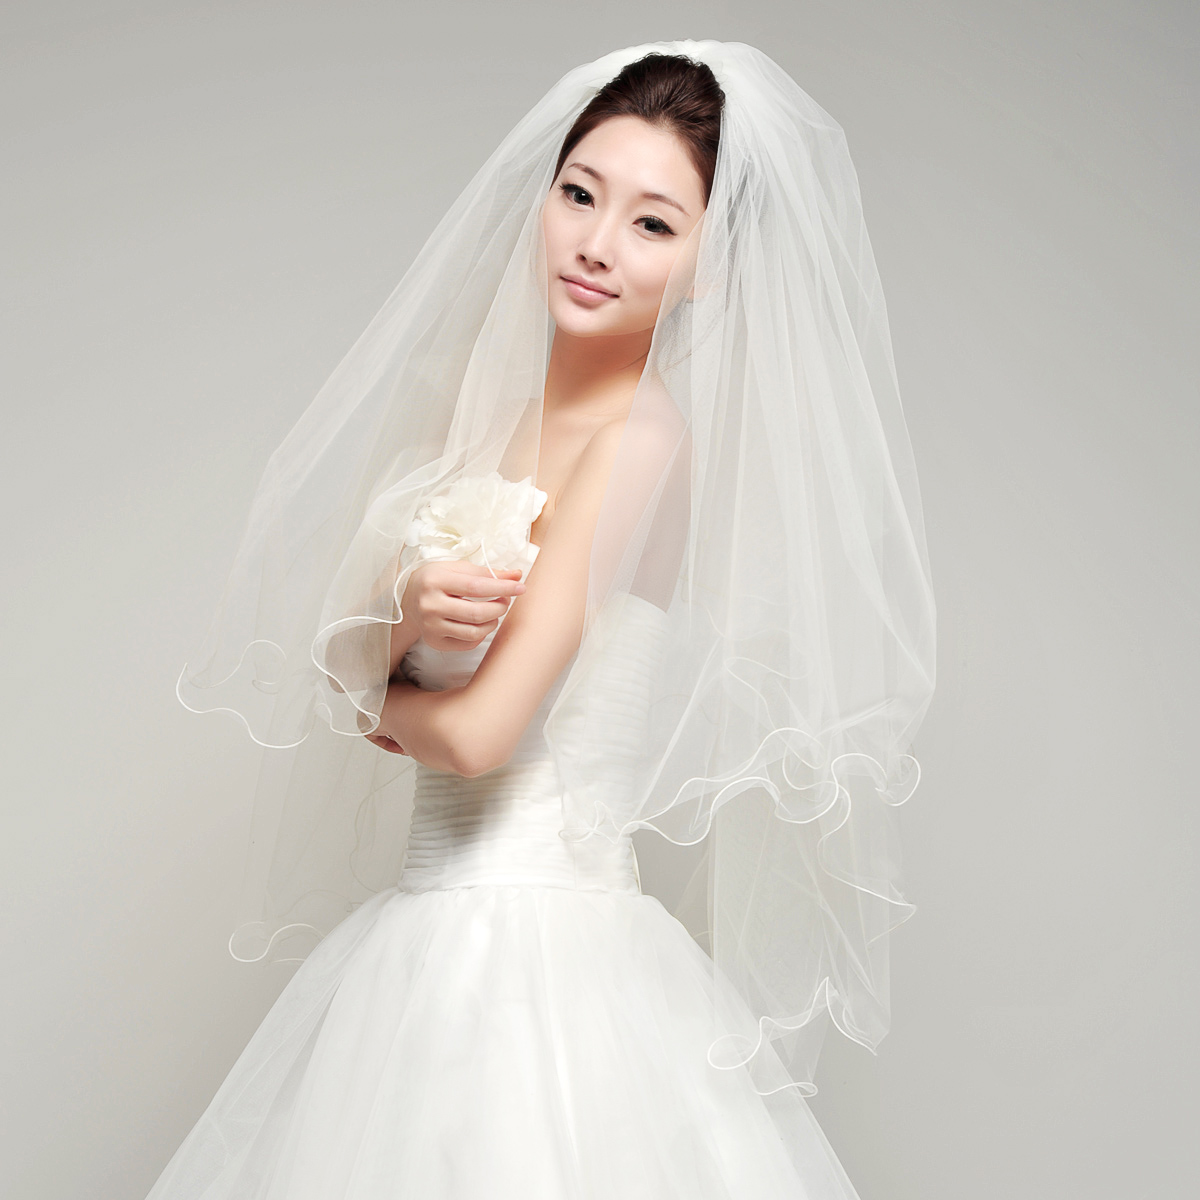 Aesthetic brief scalloped double layer belt comb bridal veil